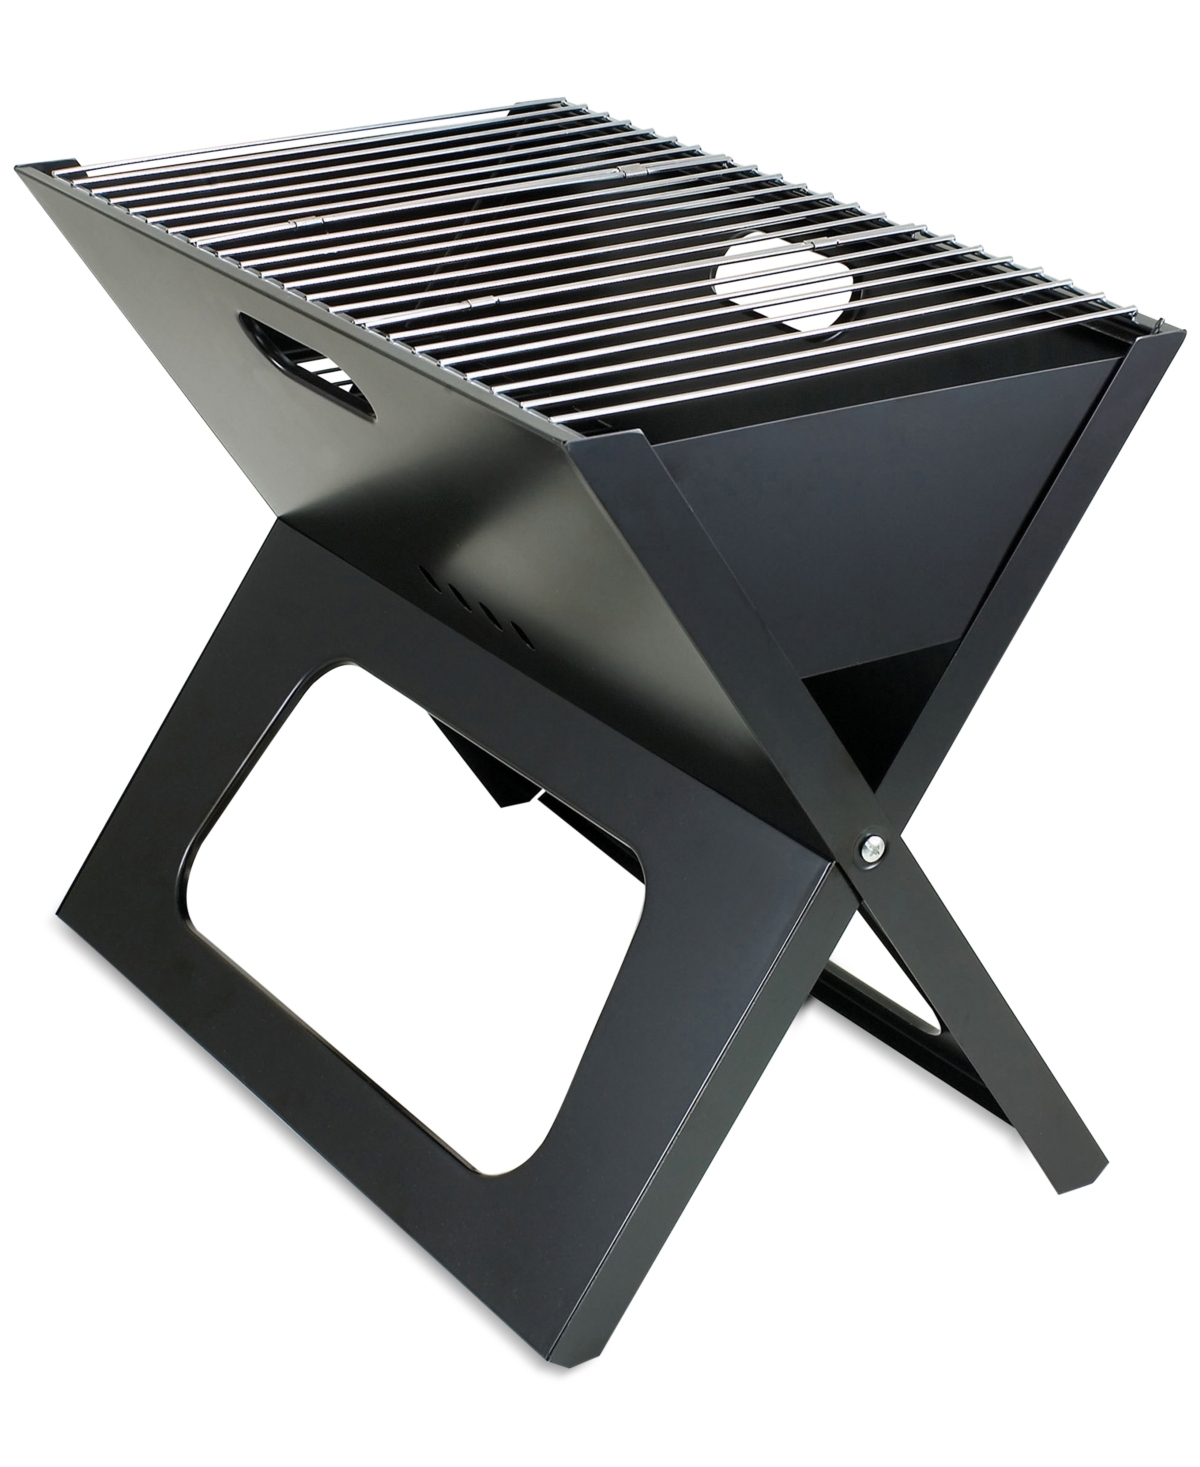 Oniva by Picnic Time X-Grill Portable Charcoal Bbq Grill